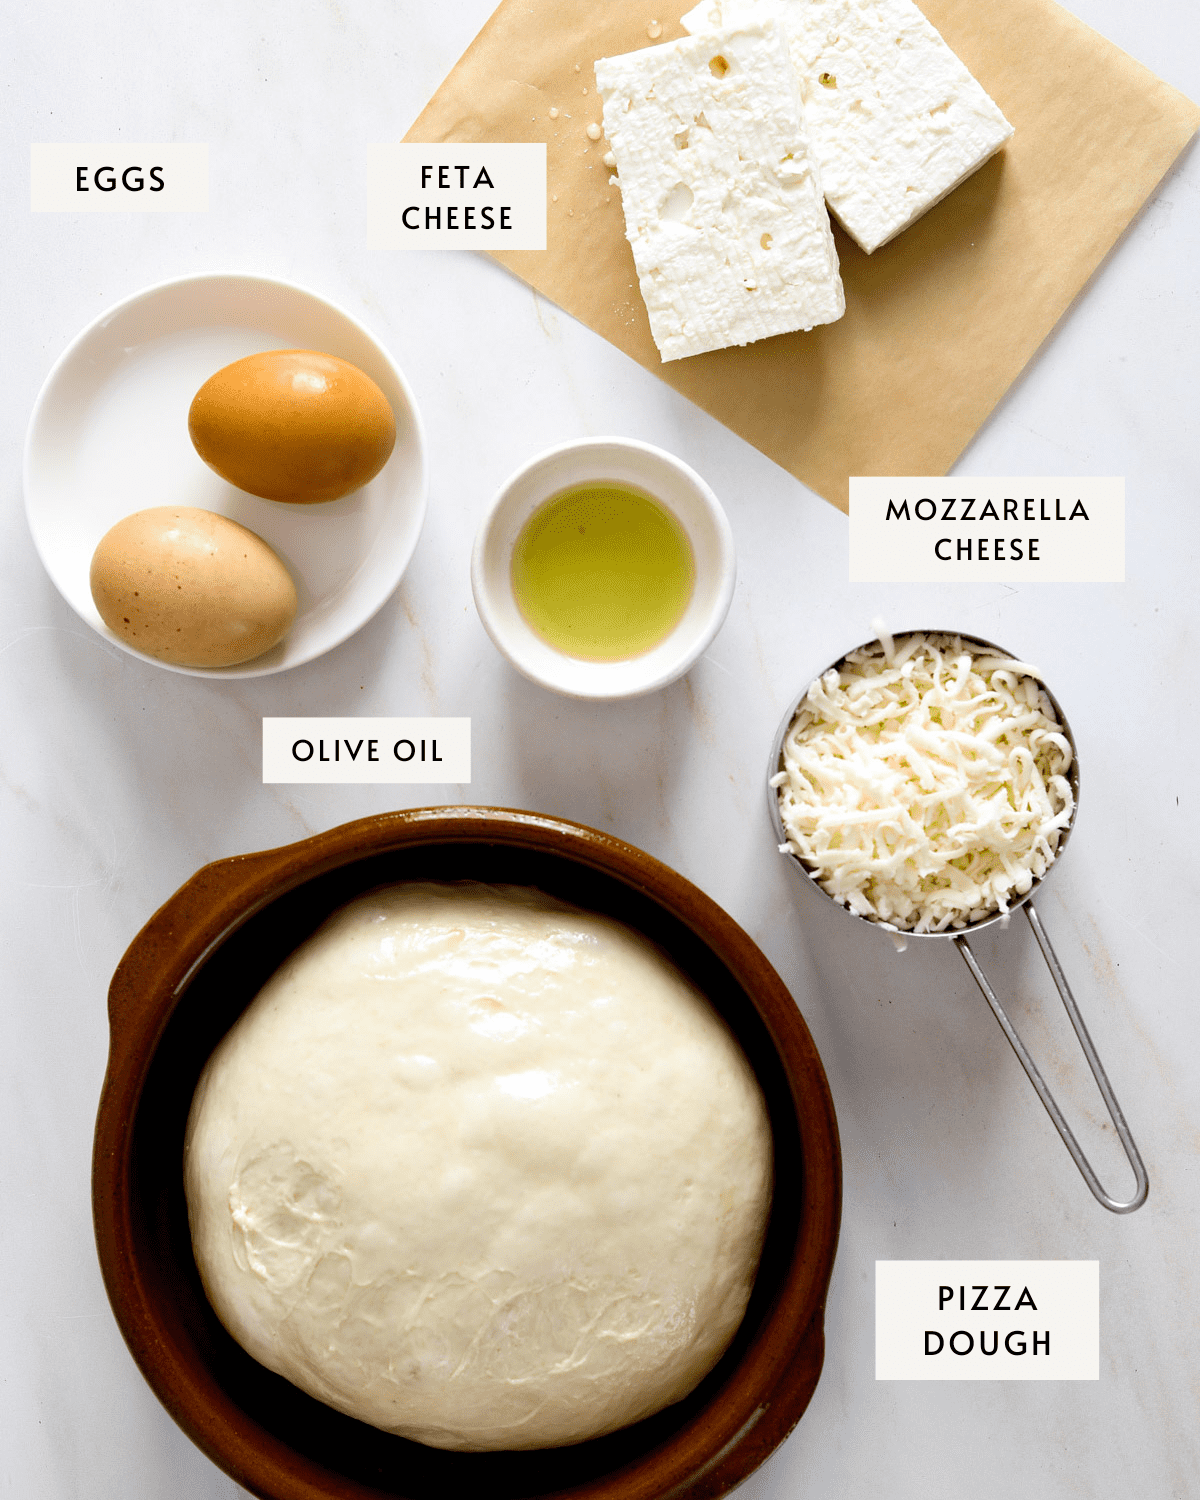 A small white bowl with two brown eggs, two hunks of feta cheese, a ball of pizza dough in a ceramic bowl, a measuring cup with grated mozzarella cheese and a small dish of olive oil.